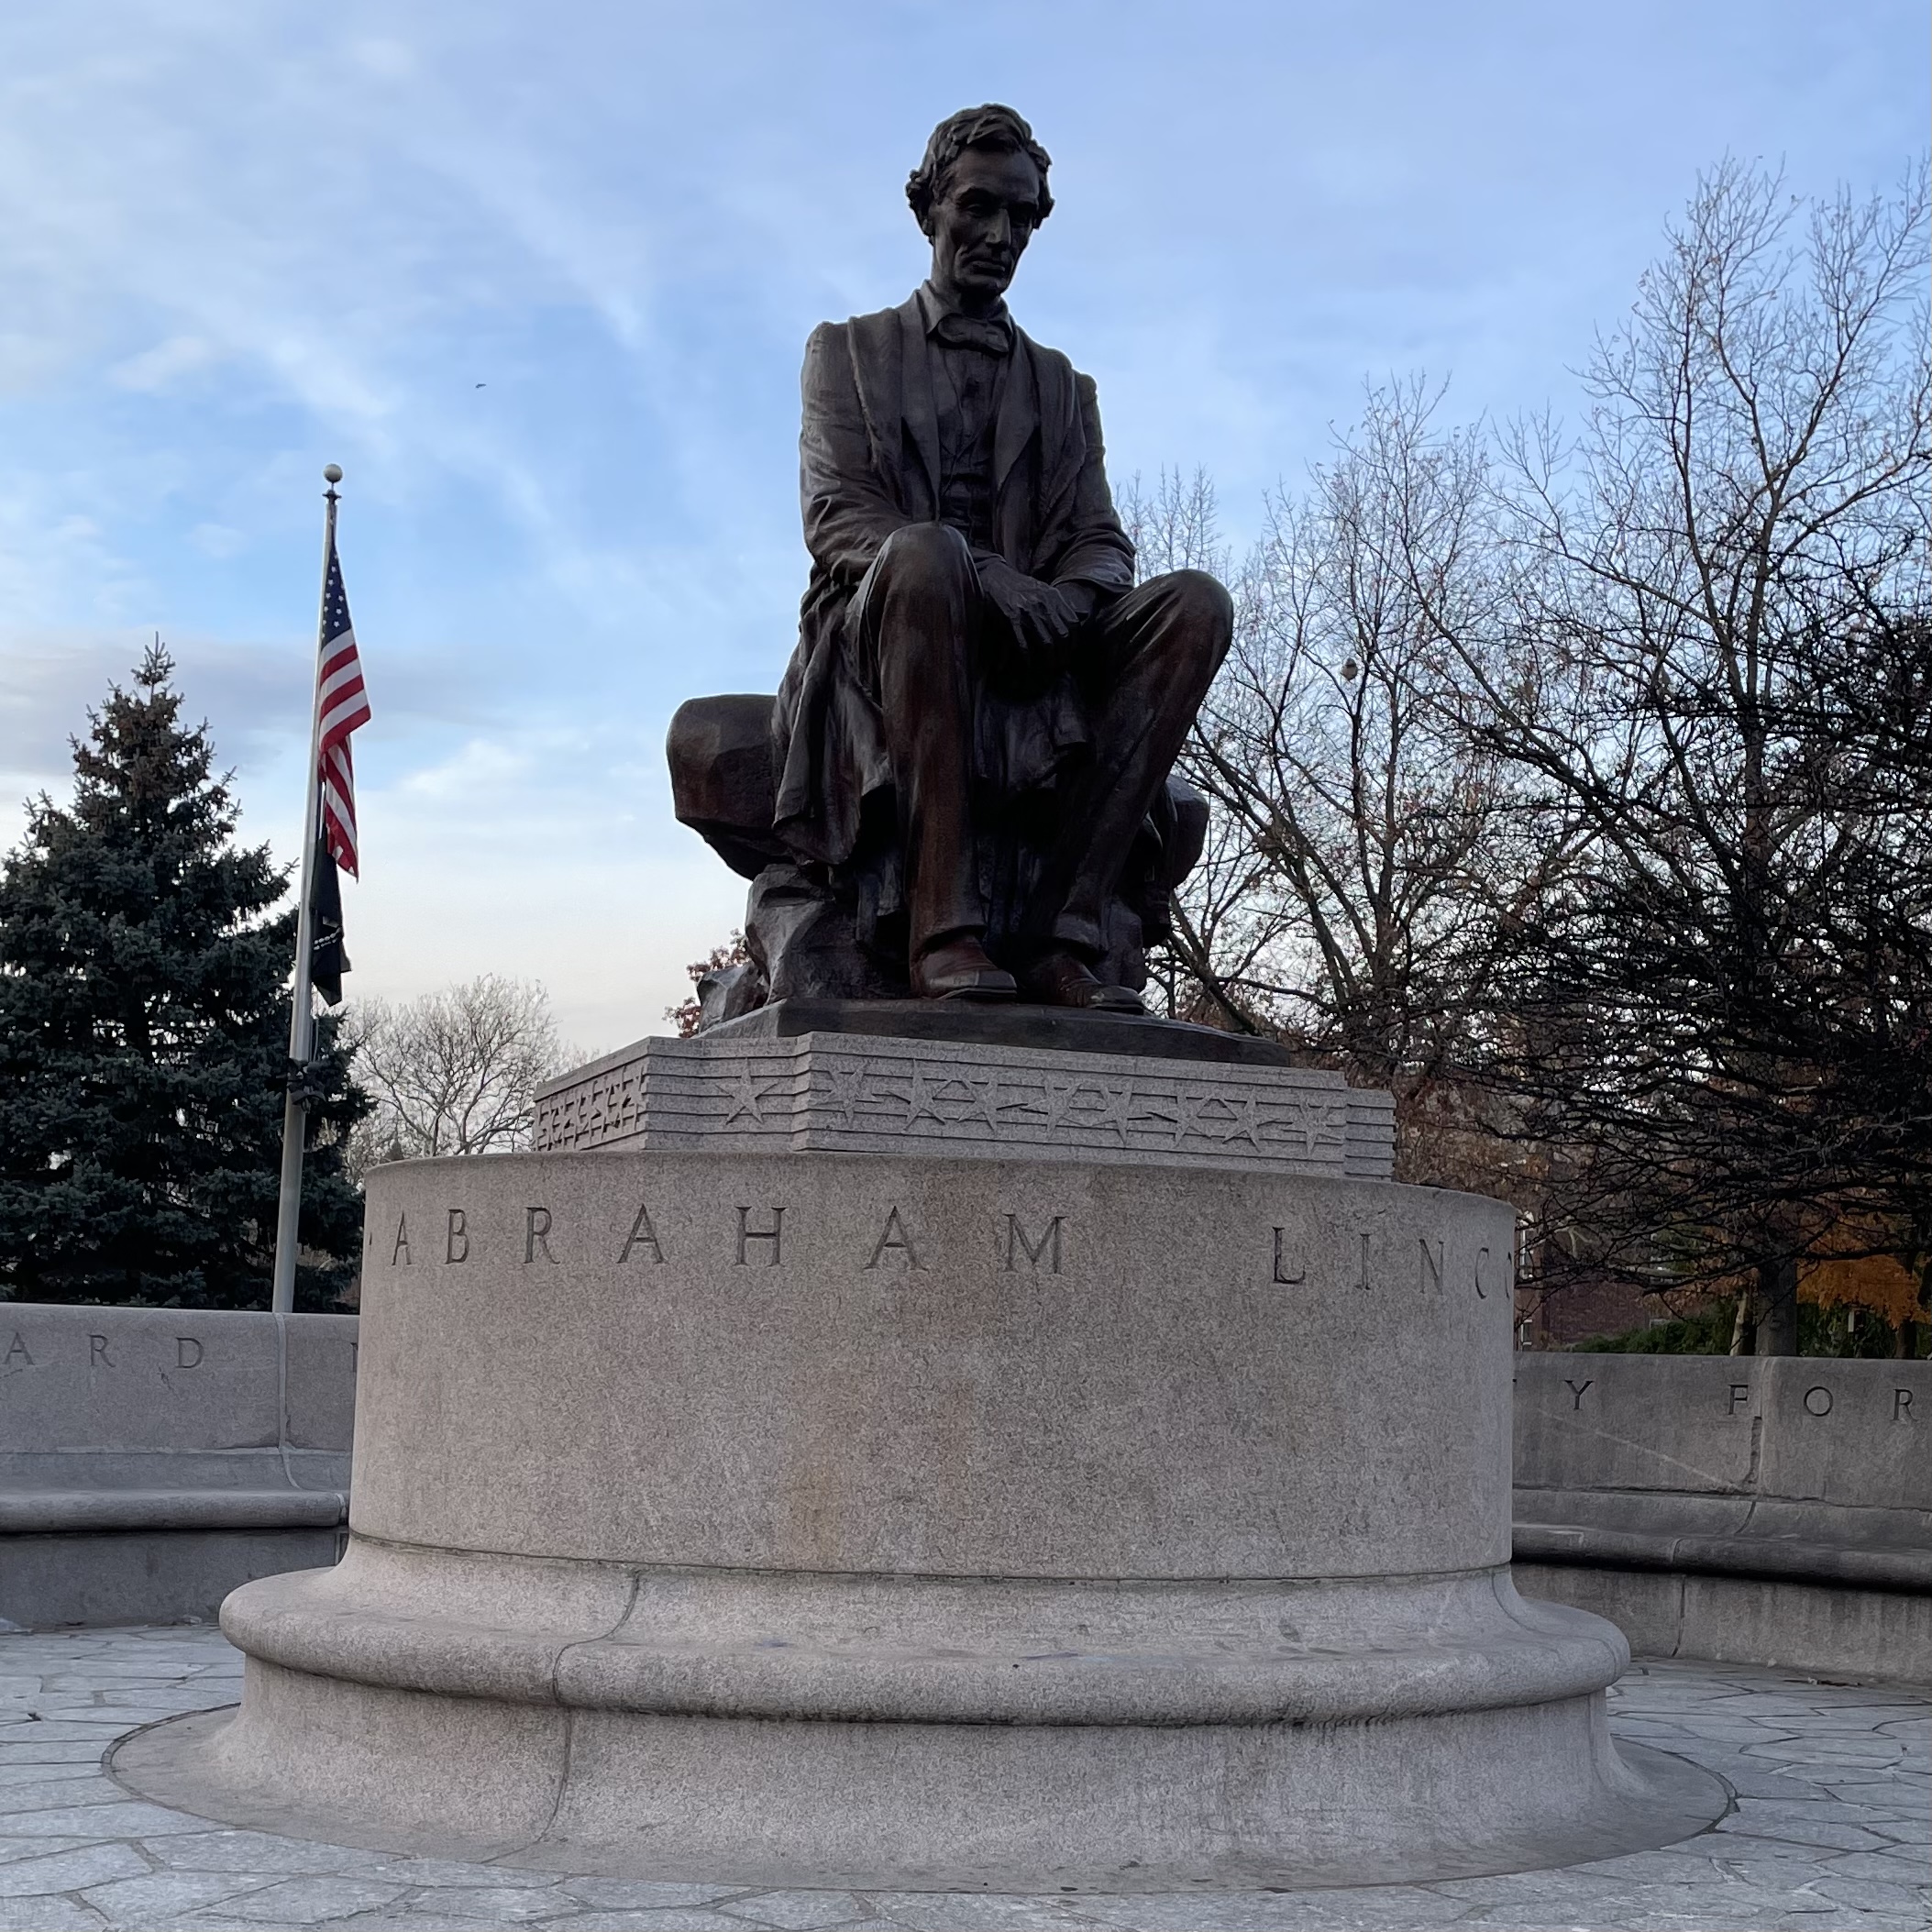 Starting point at statue of Abraham Lincoln